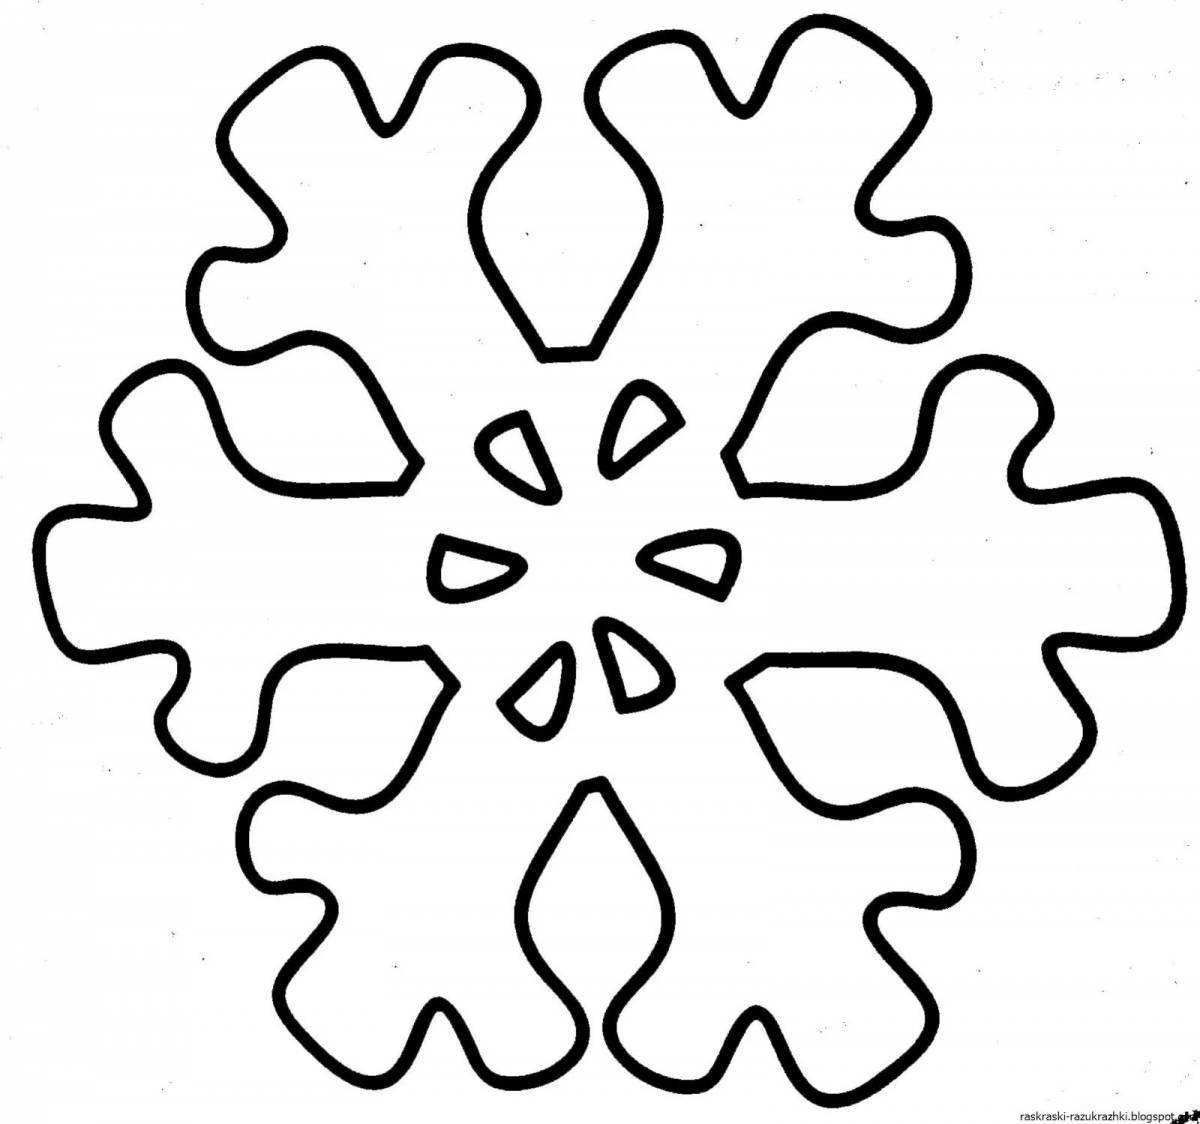 Funny snowflake coloring book for kids